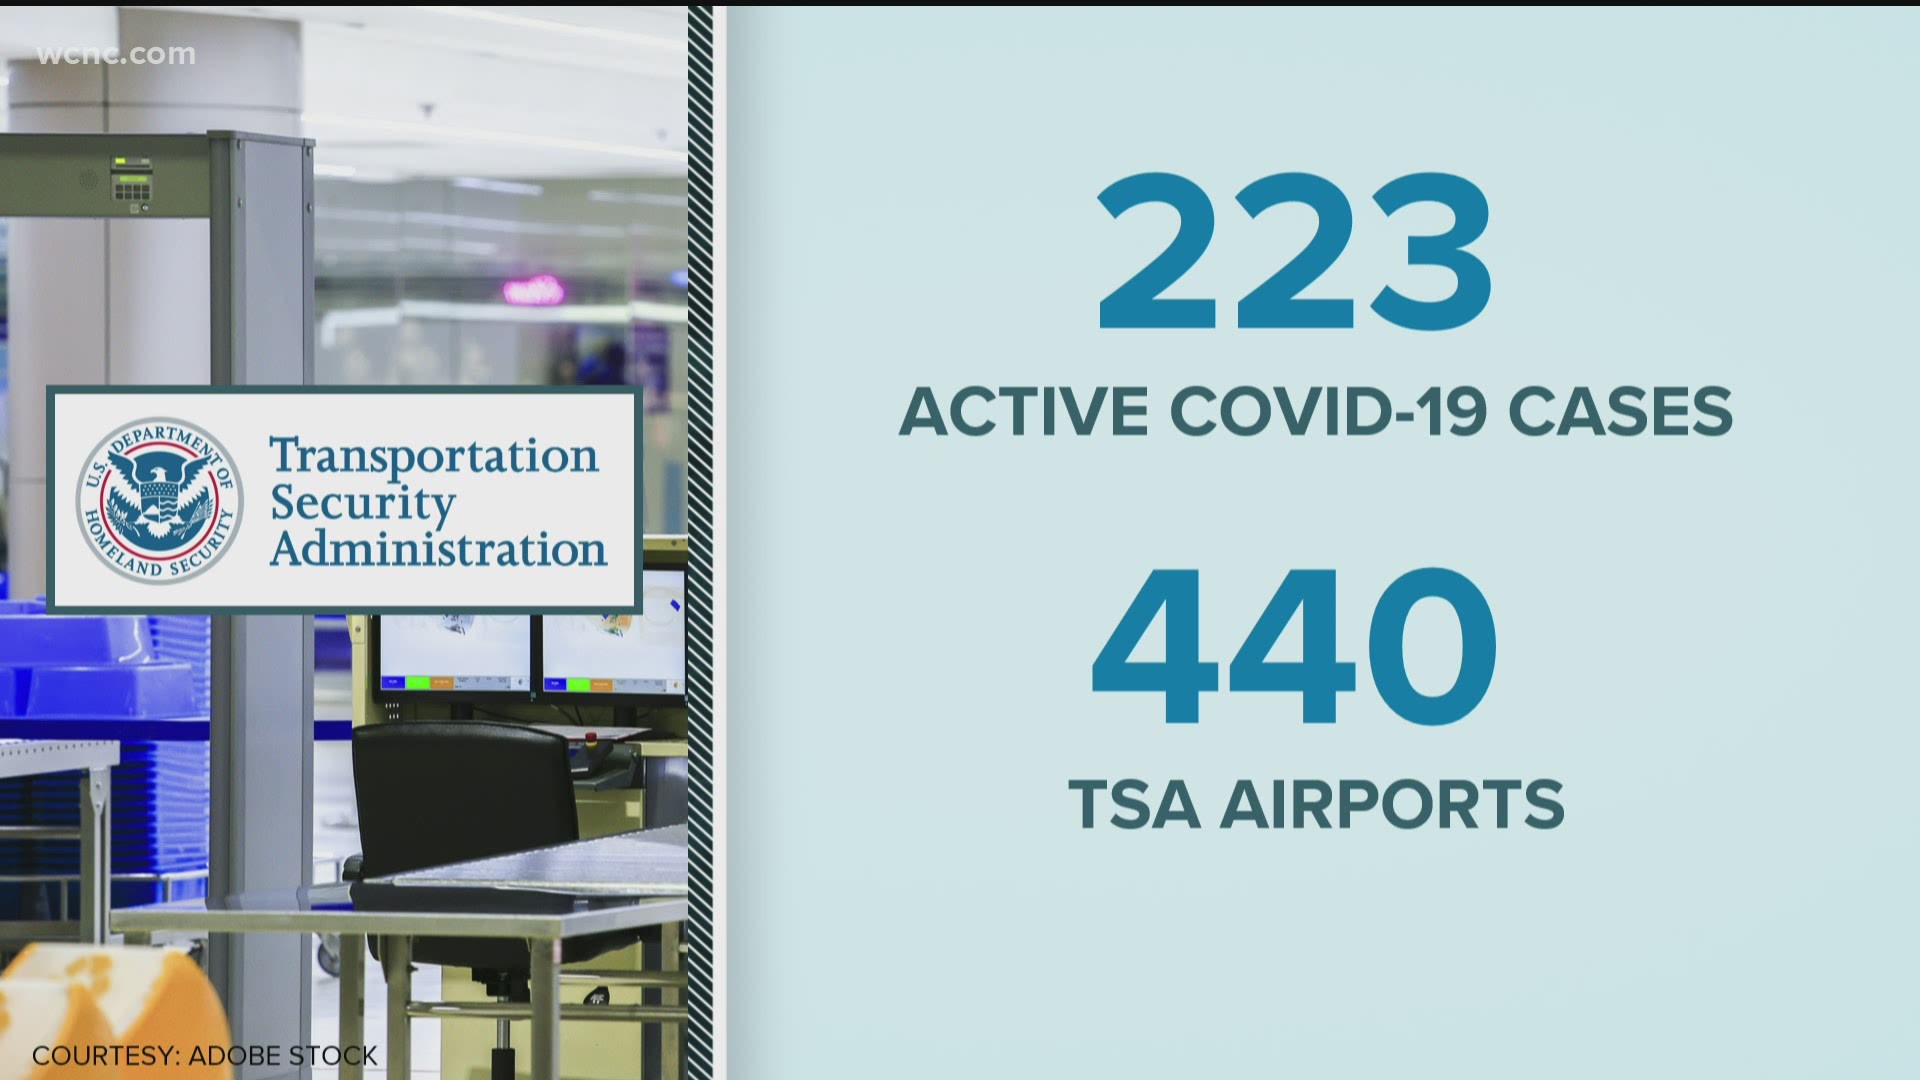 An estimated 2.5 million people are expected to fly over Memorial Day weekend as COVID-19 cases continue to drop nationwide.